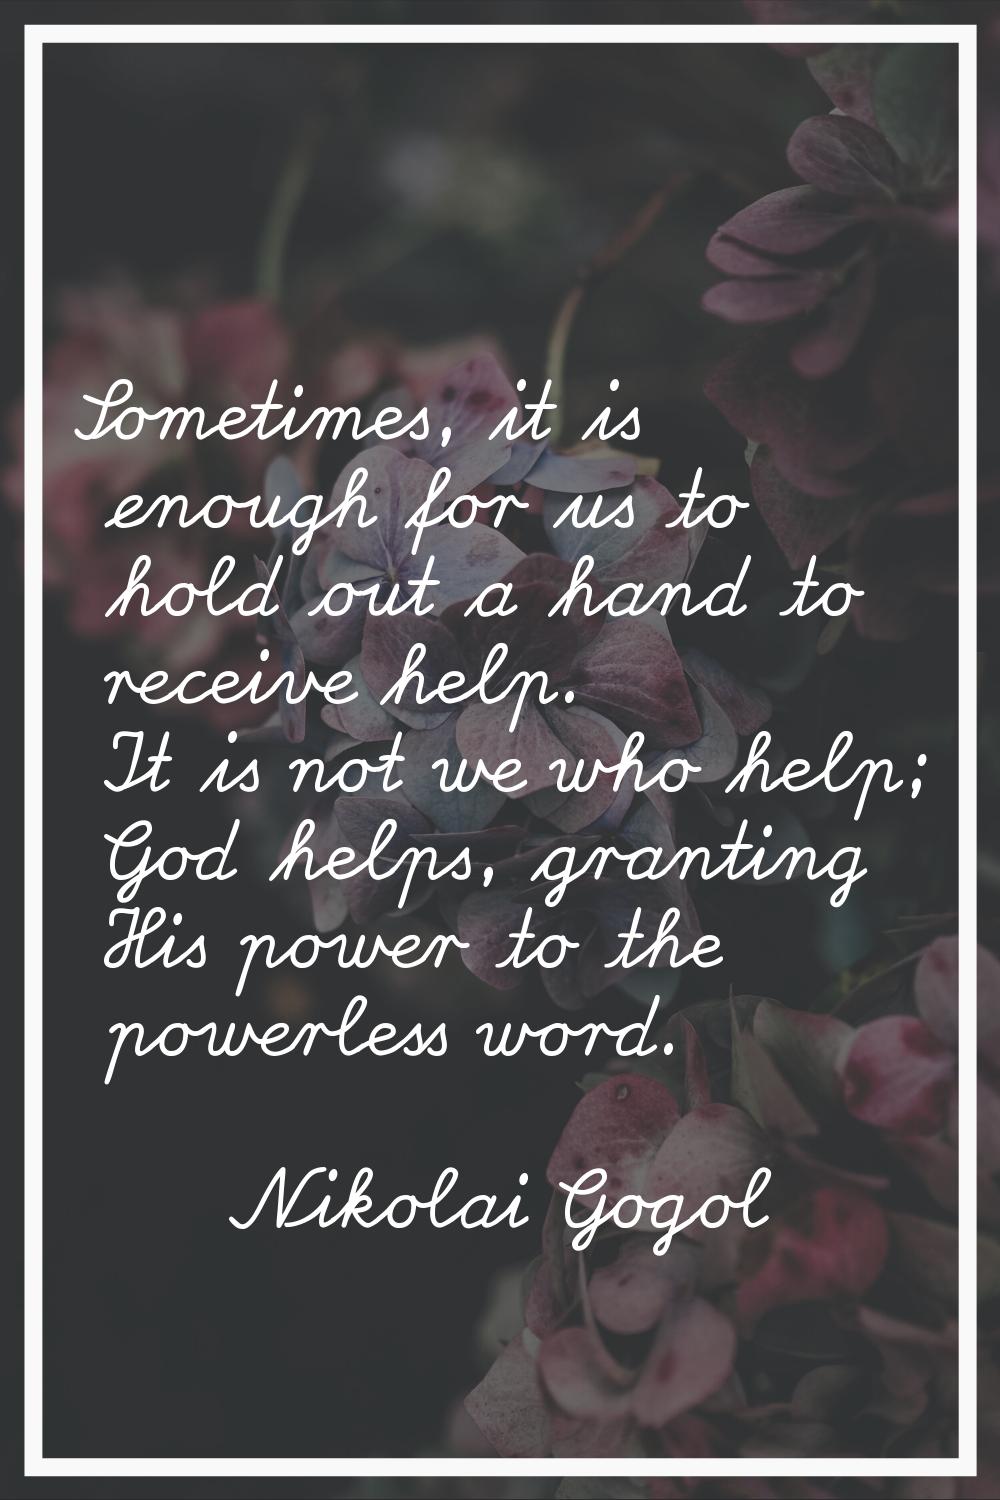 Sometimes, it is enough for us to hold out a hand to receive help. It is not we who help; God helps